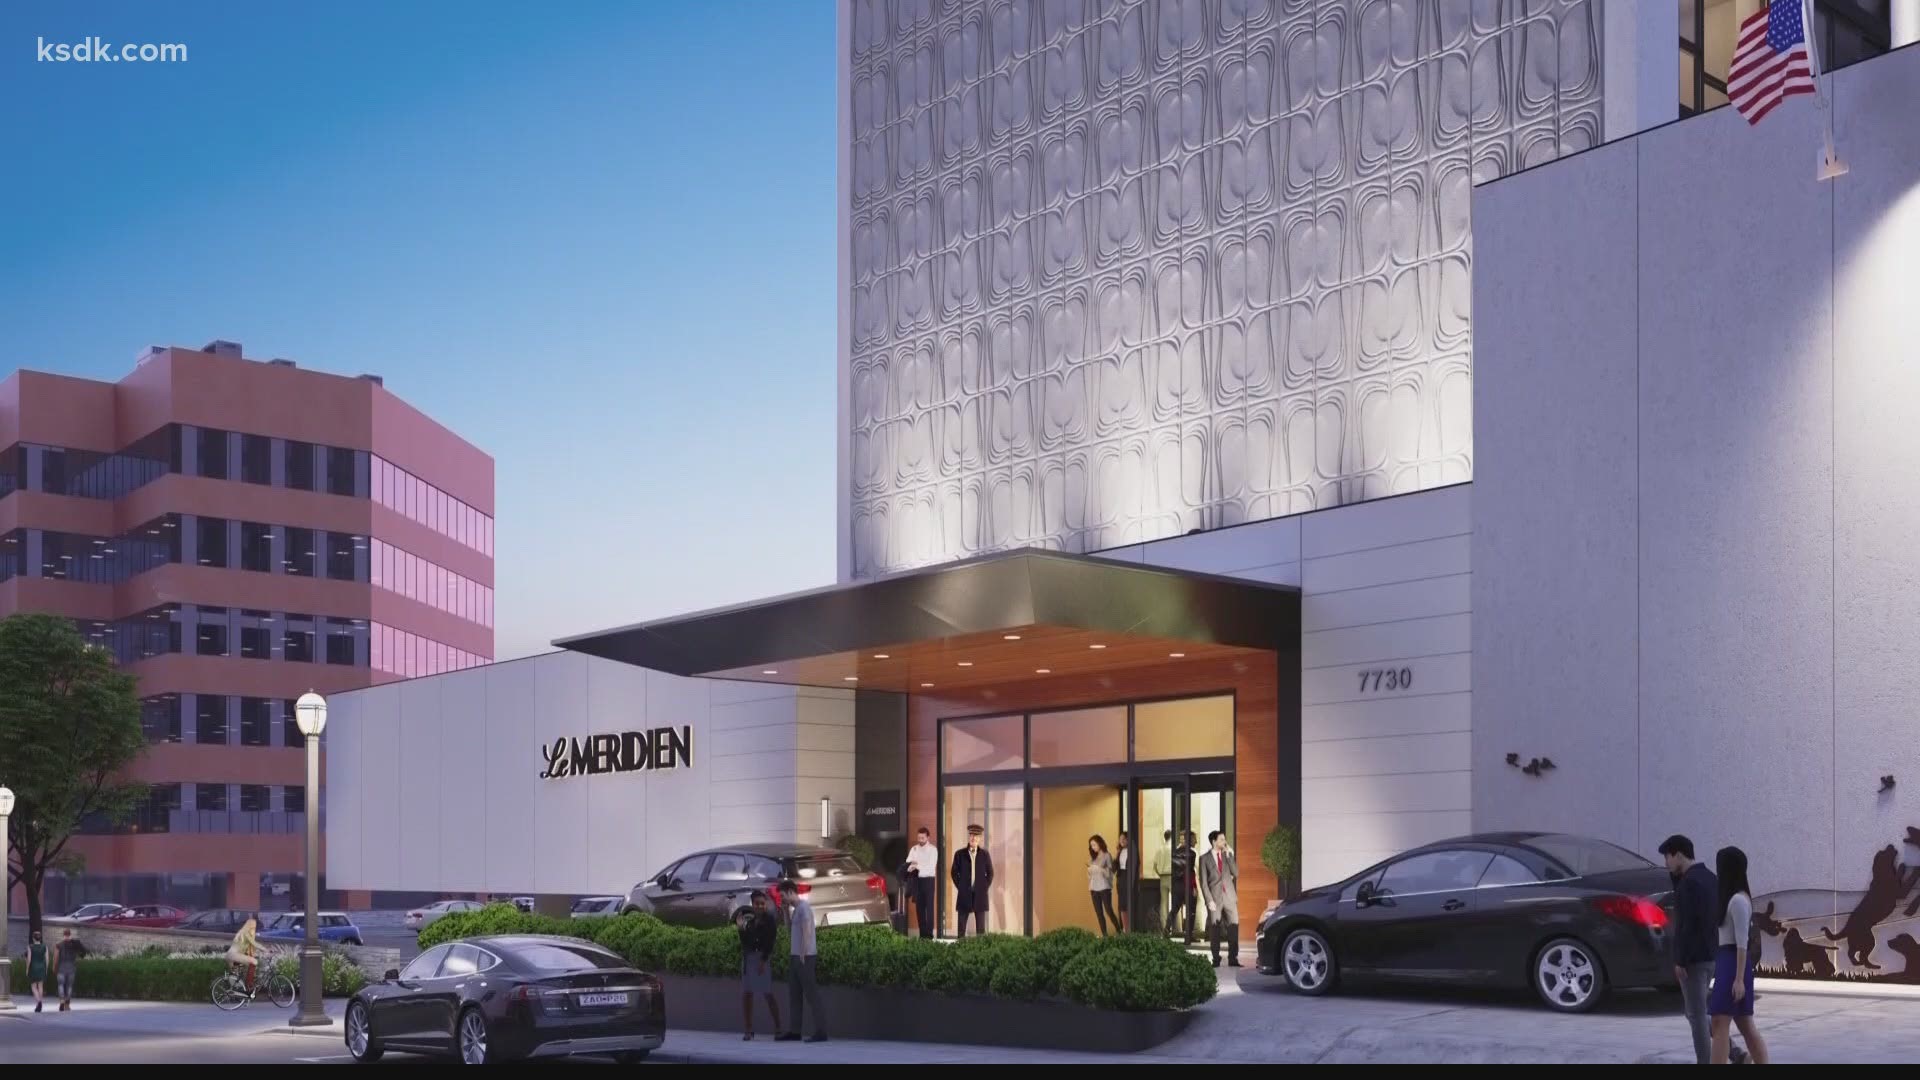 Le Meridien St. Louis Clayton wanted to do something special for the healthcare community, so the hotel is offering a discount for medical professionals.